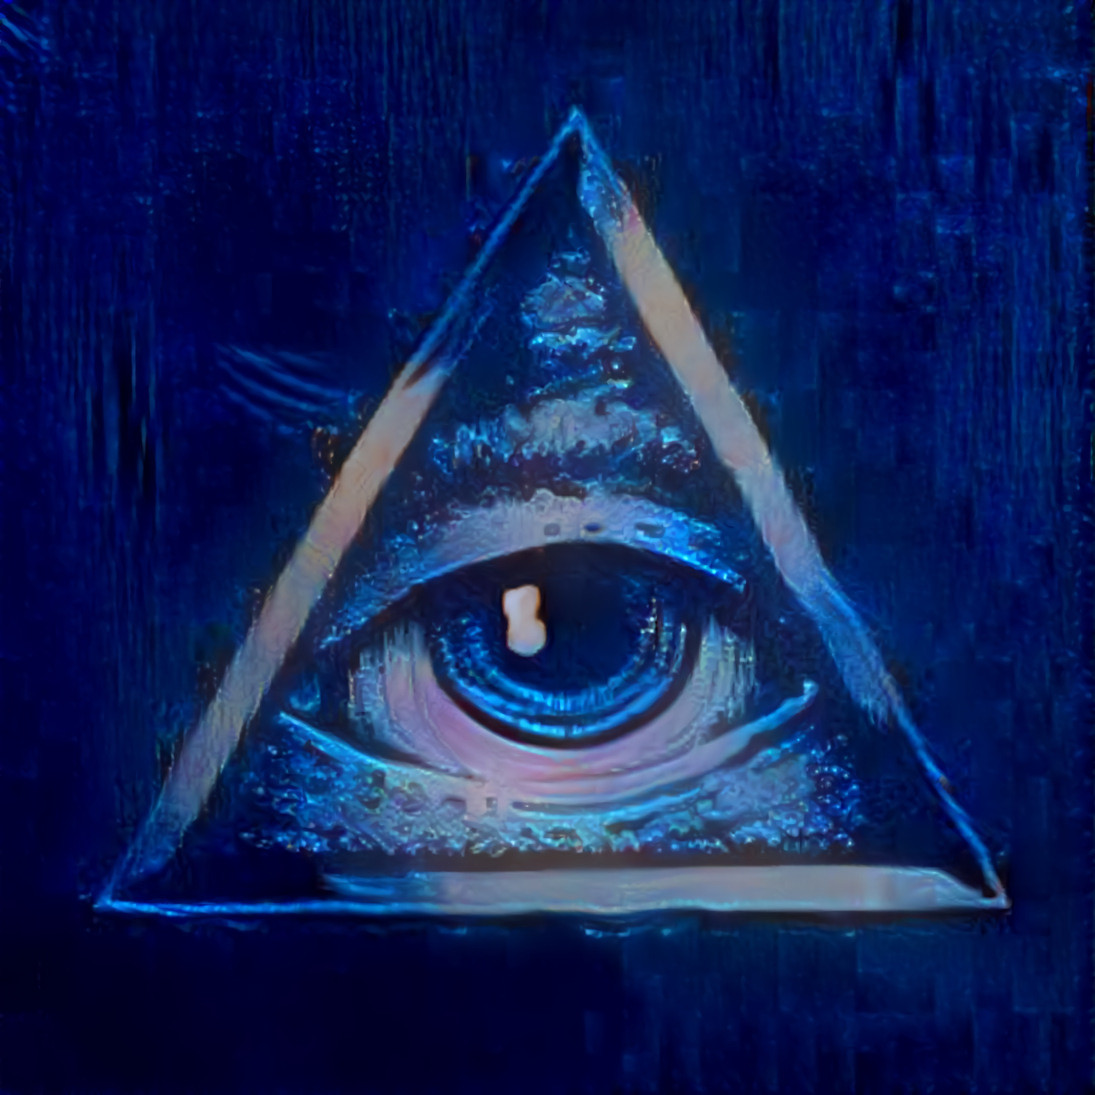 “All Seeing”